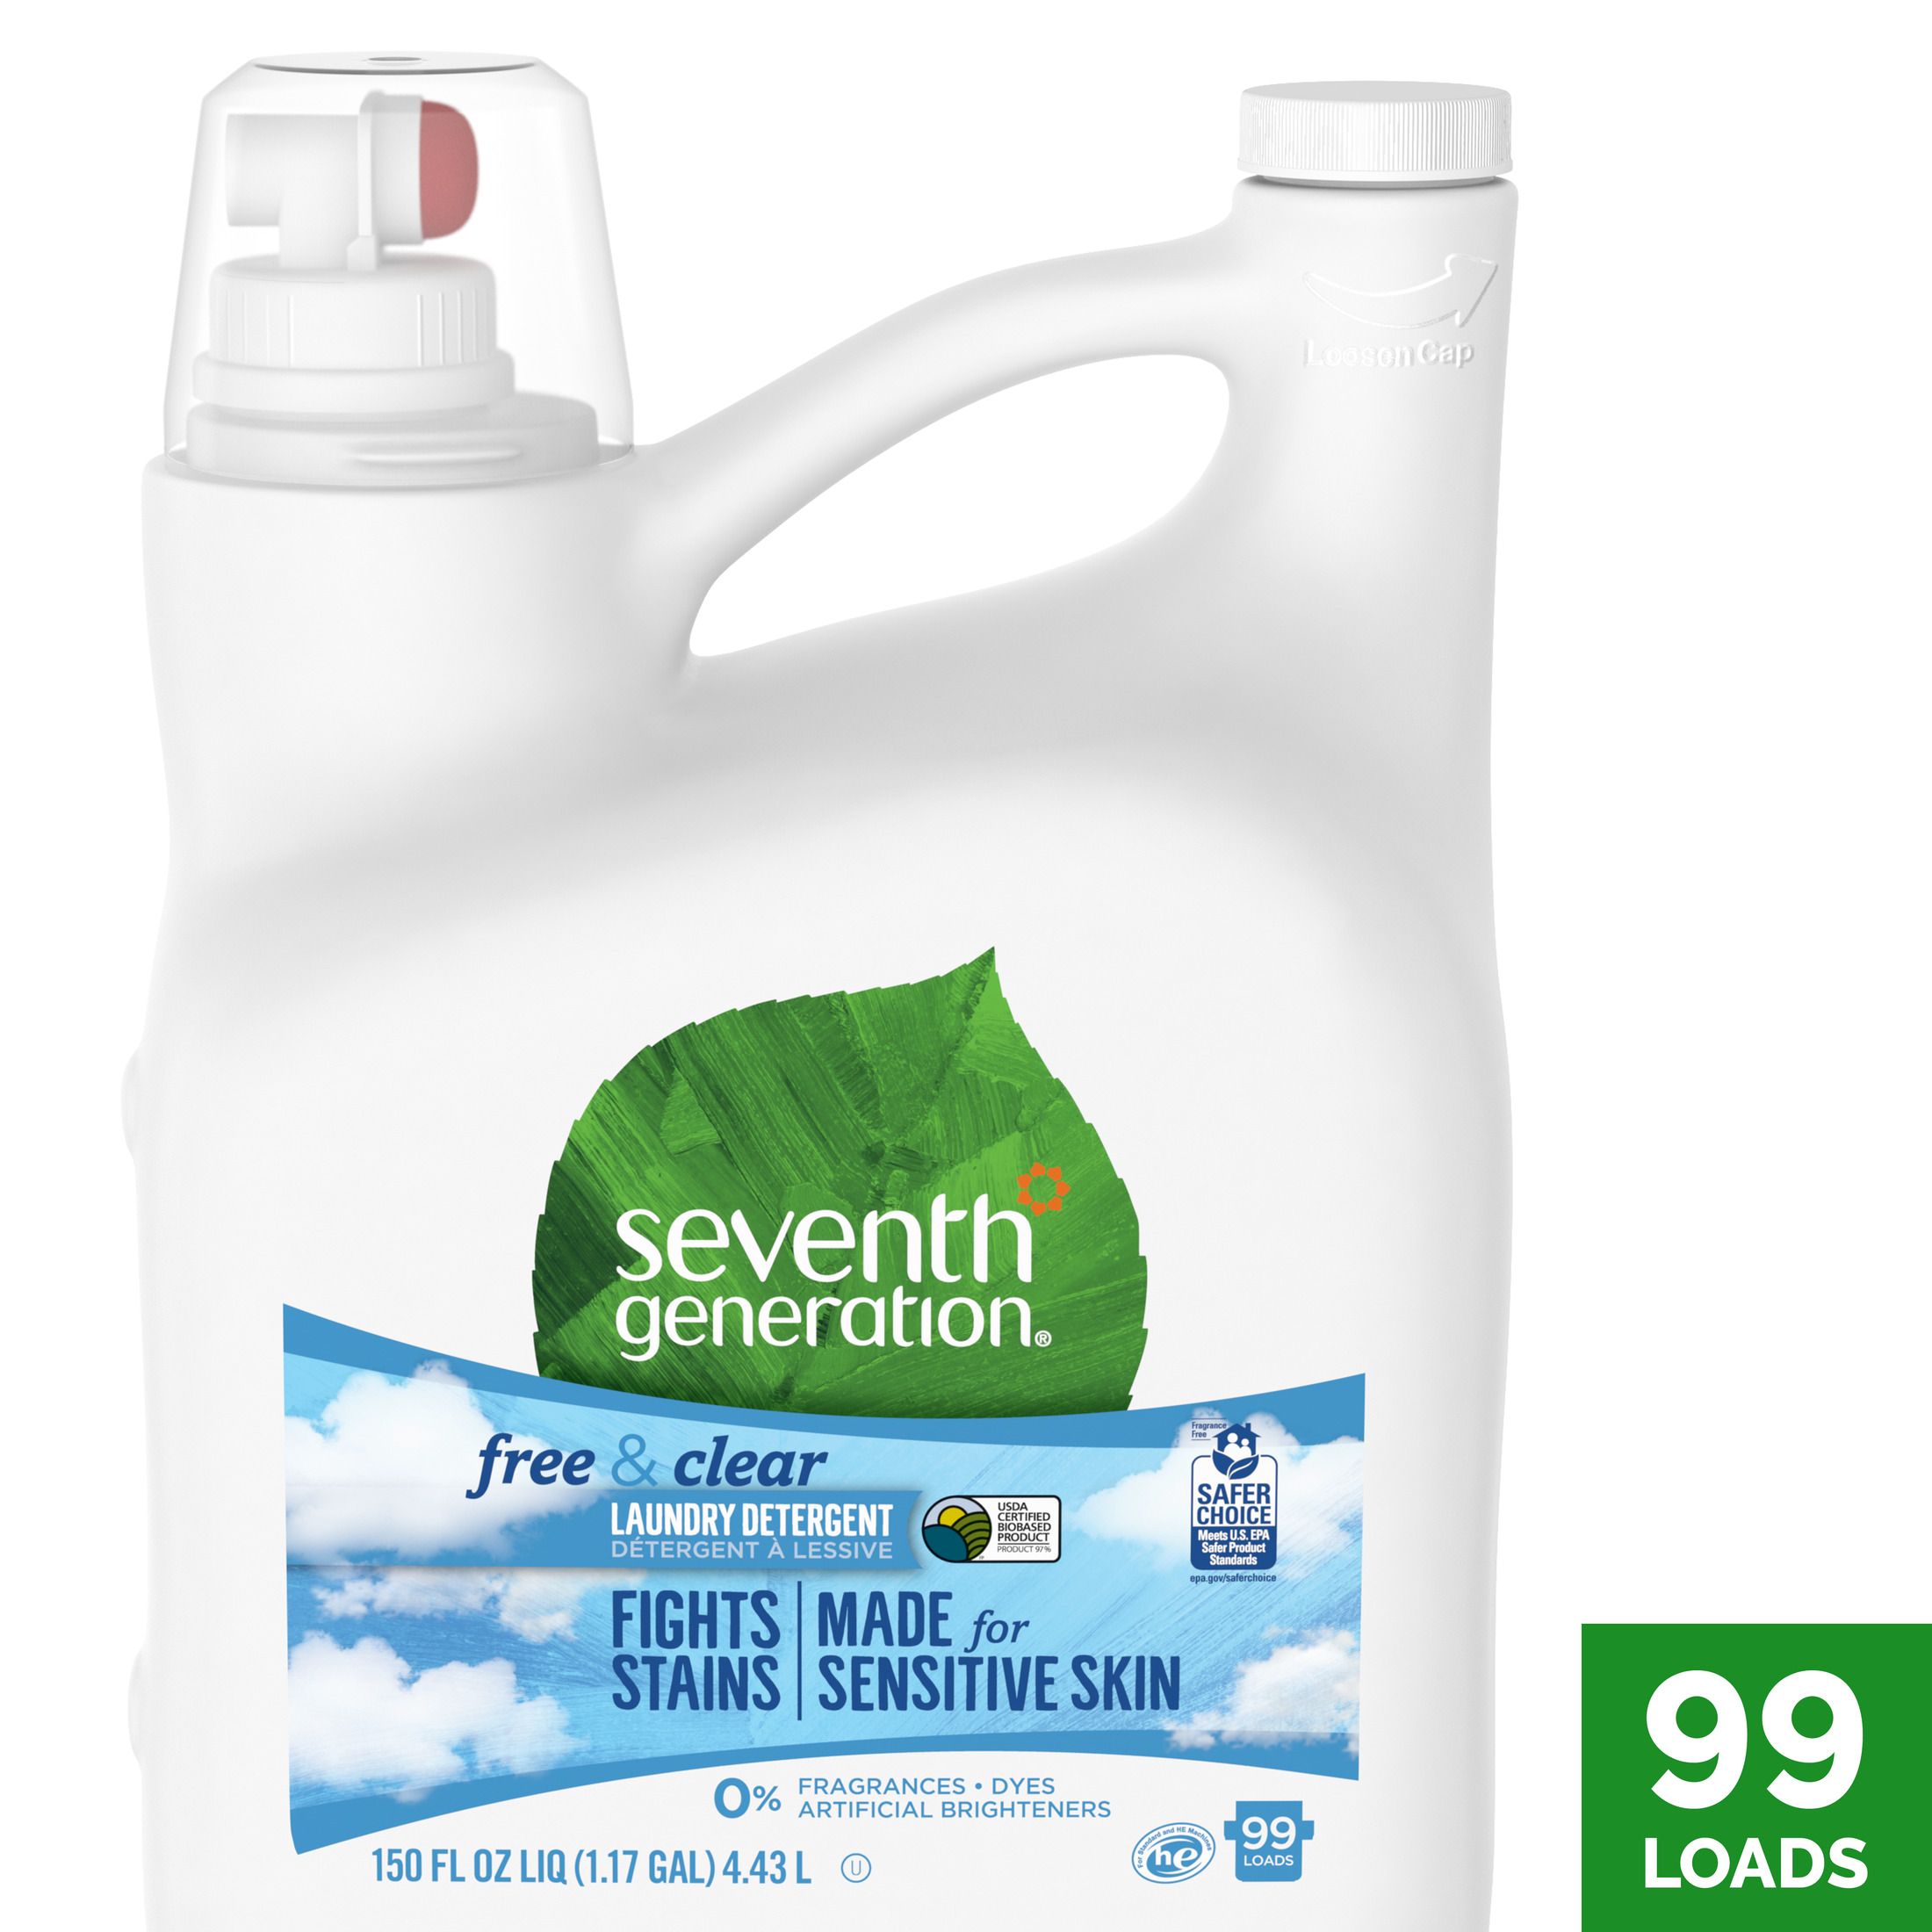 Seventh Generation Liquid Laundry Detergent Biodegradable Free & Clear, 150 oz - image 1 of 12